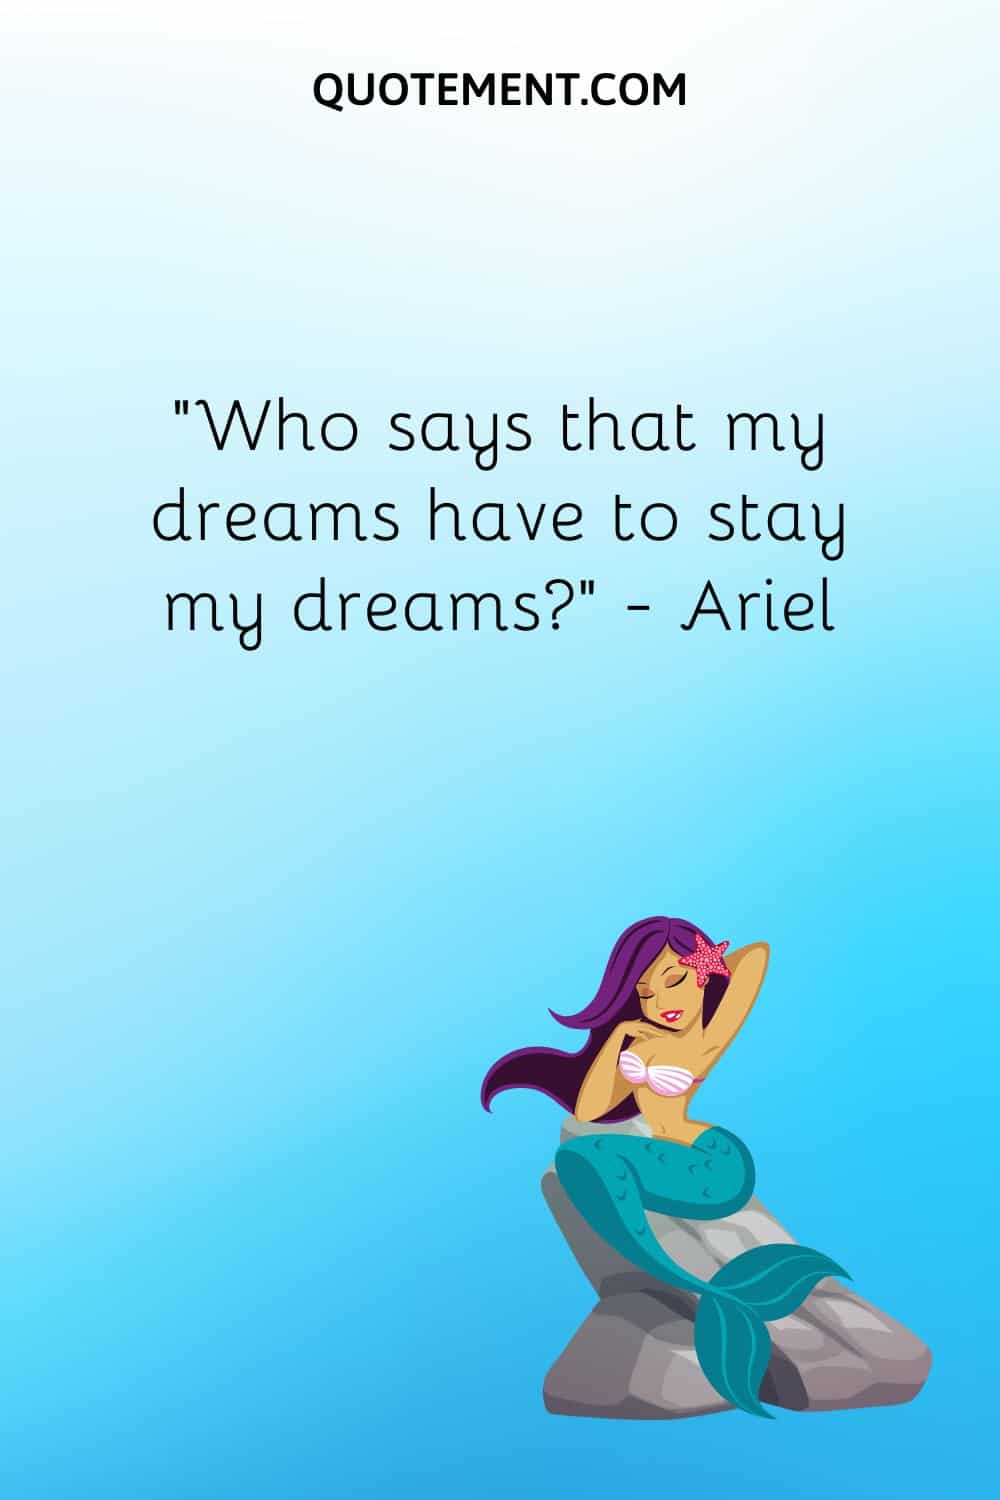 “Who says that my dreams have to stay my dreams” ― Ariel